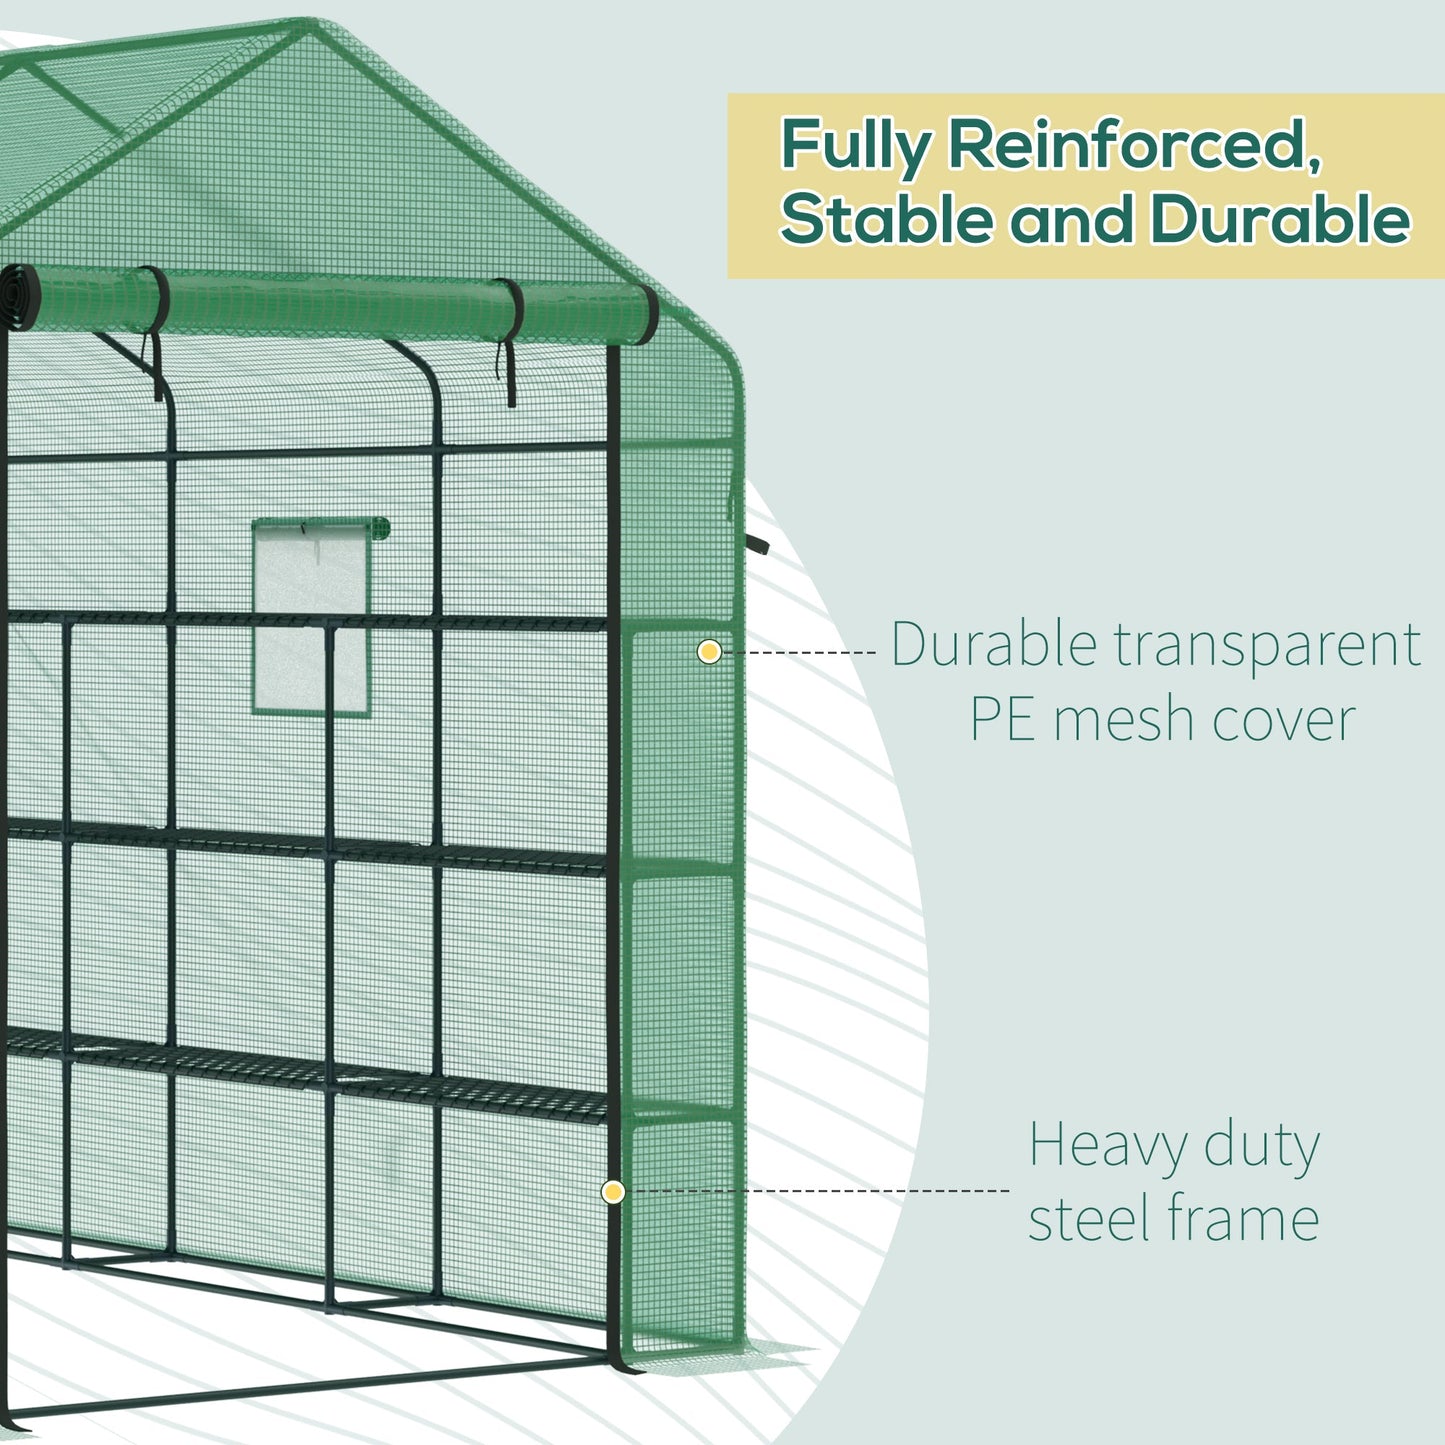 Miscellaneous-8' x 6' x 7' Portable Walk-in Greenhouse, 18 Shelf Hot House, Roll Up Zipper Door, UV protective for Growing Flowers, Vegetables - Outdoor Style Company